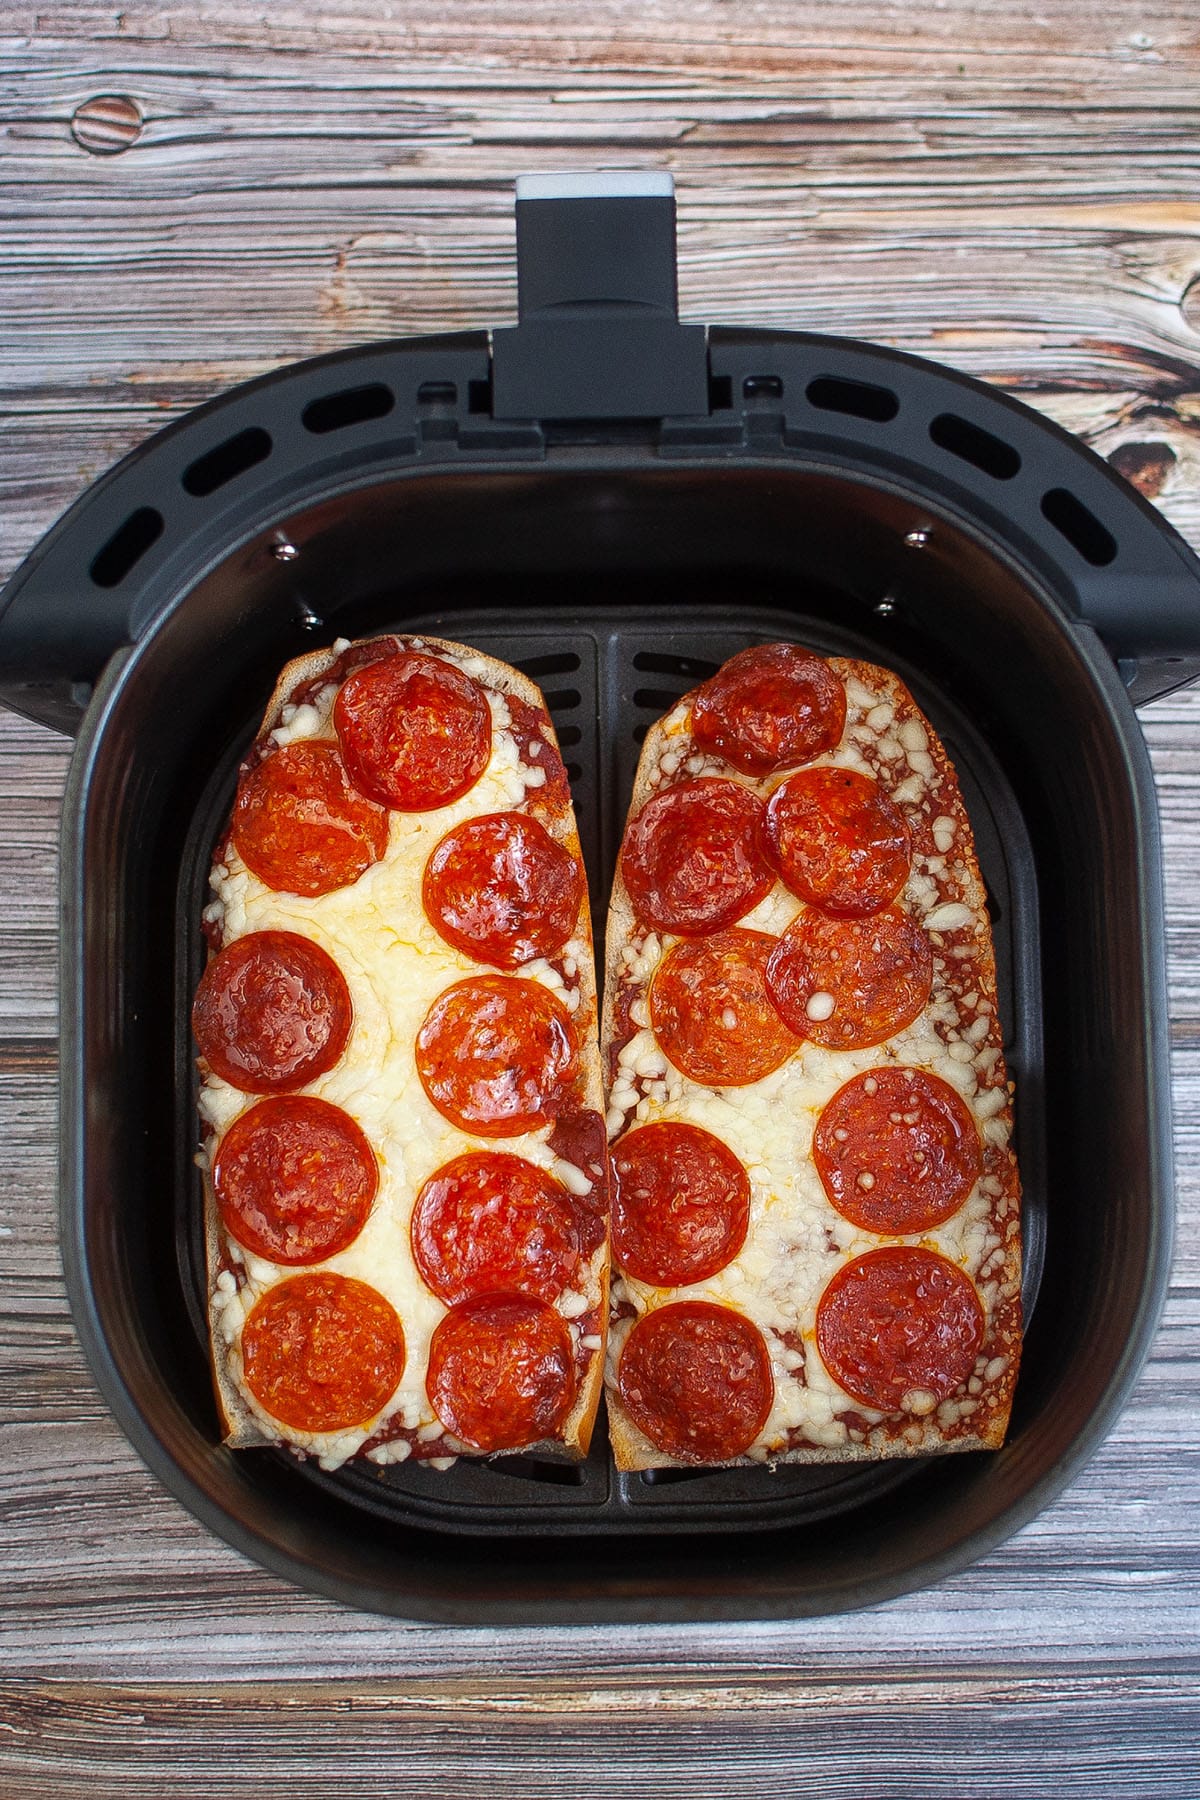 Black air fryer basket containing a cooked pepperoni pizza